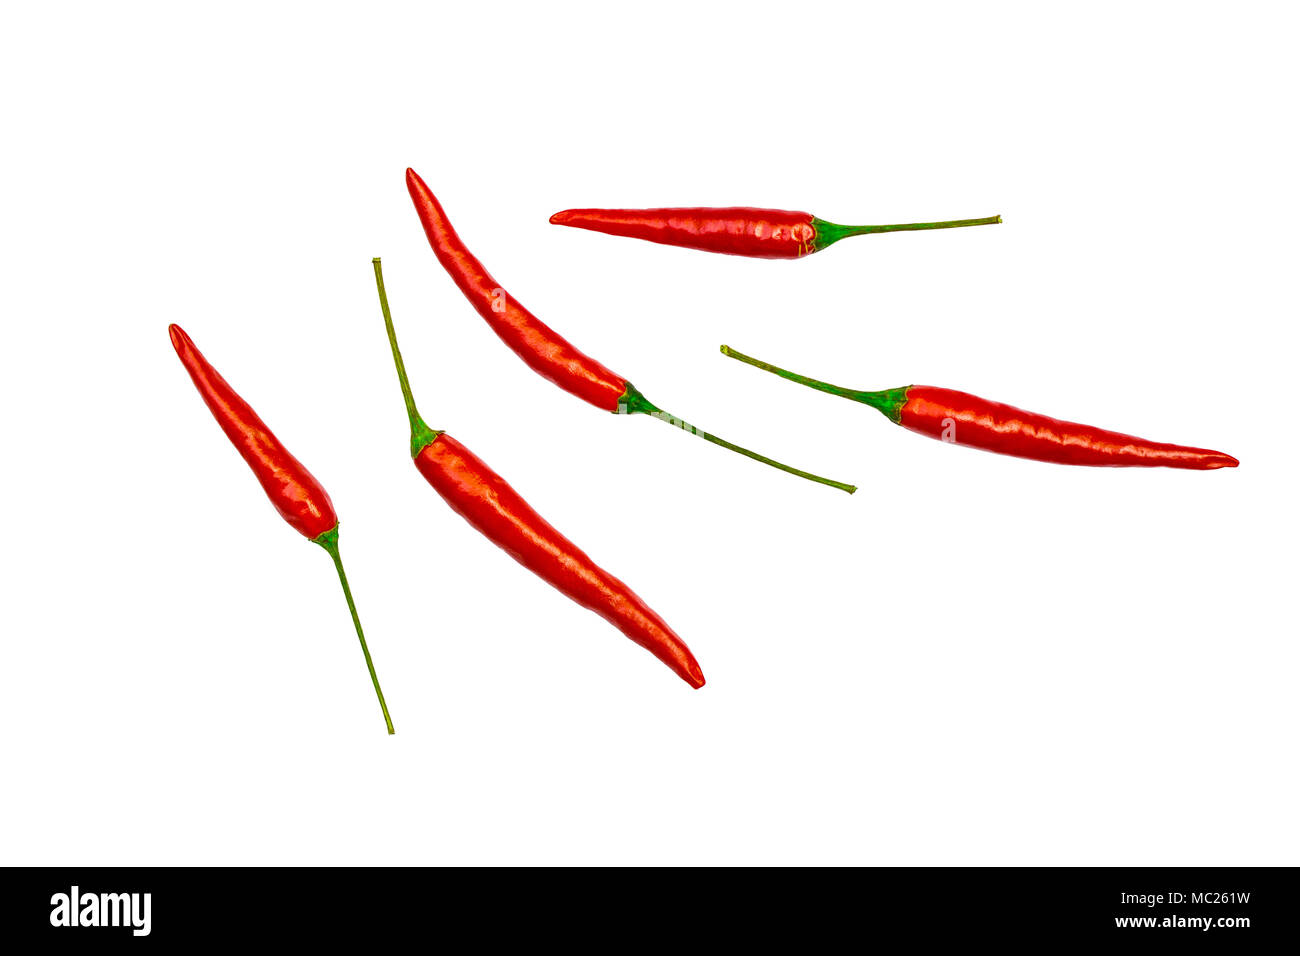 Red Hot Chili spice isolé sur fond blanc avec clipping path Banque D'Images